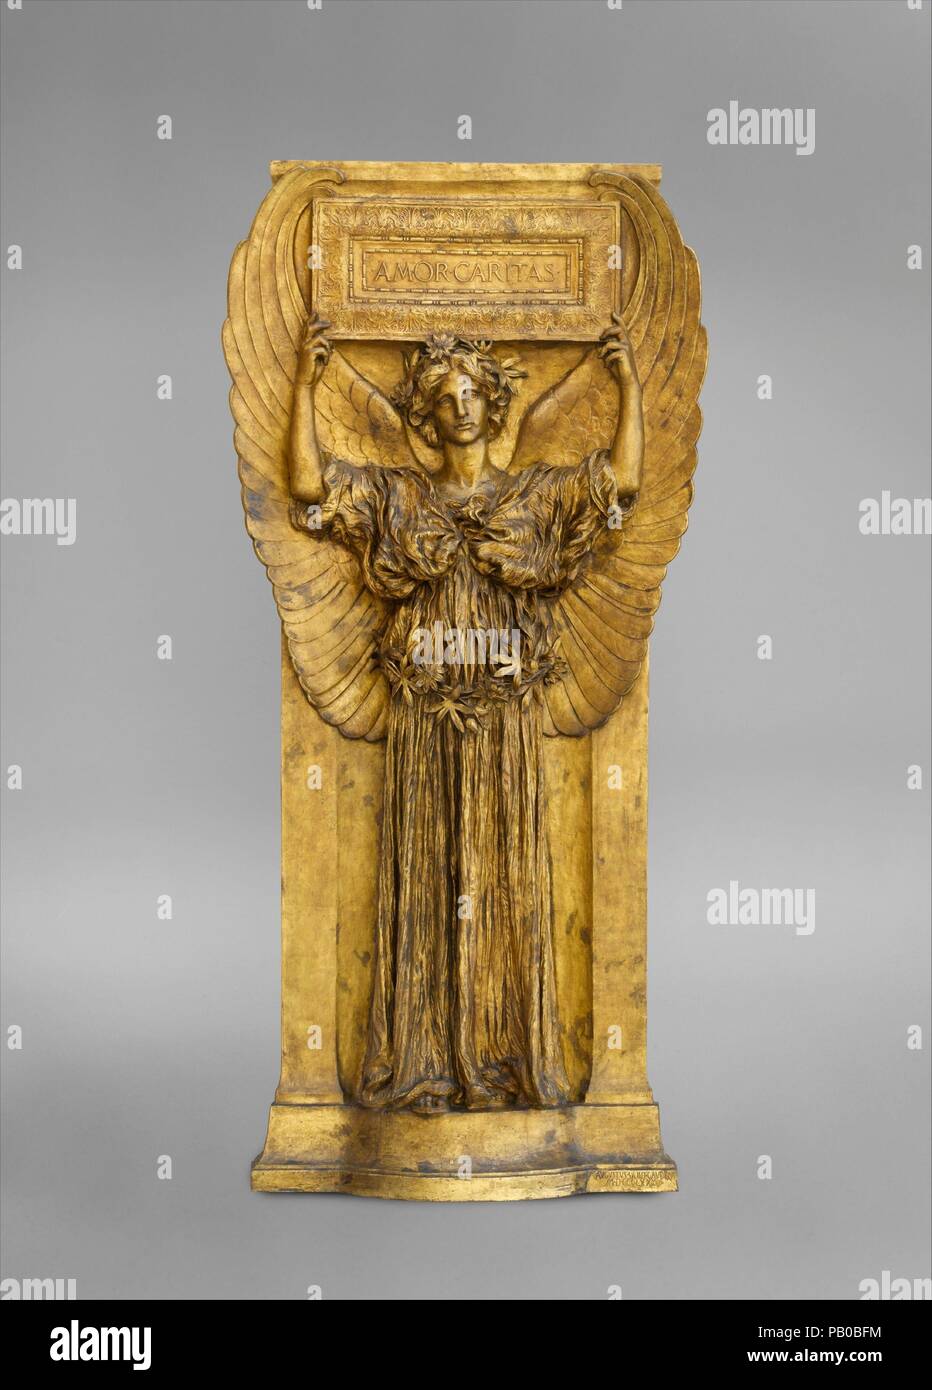 Amor Caritas. Artist: Augustus Saint-Gaudens (American, Dublin 1848-1907 Cornish, New Hampshire). Dimensions: 103 1/4 x 50 in. (262.3 x 127 cm). Date: 1880-98, cast 1918.  'Amor Caritas' represents the perfection of Saint-Gaudens's vision of the ethereal female, a subject that he modeled repeatedly, beginning in 1880. The elegant figure in a frontal pose with free-flowing draperies and downcast eyes also appears in the caryatids for the Vanderbilt mantelpiece (25.234) and in several funerary works. Here, Saint-Gaudens made subtle changes in the drapery and added upward-curving wings, a tablet, Stock Photo